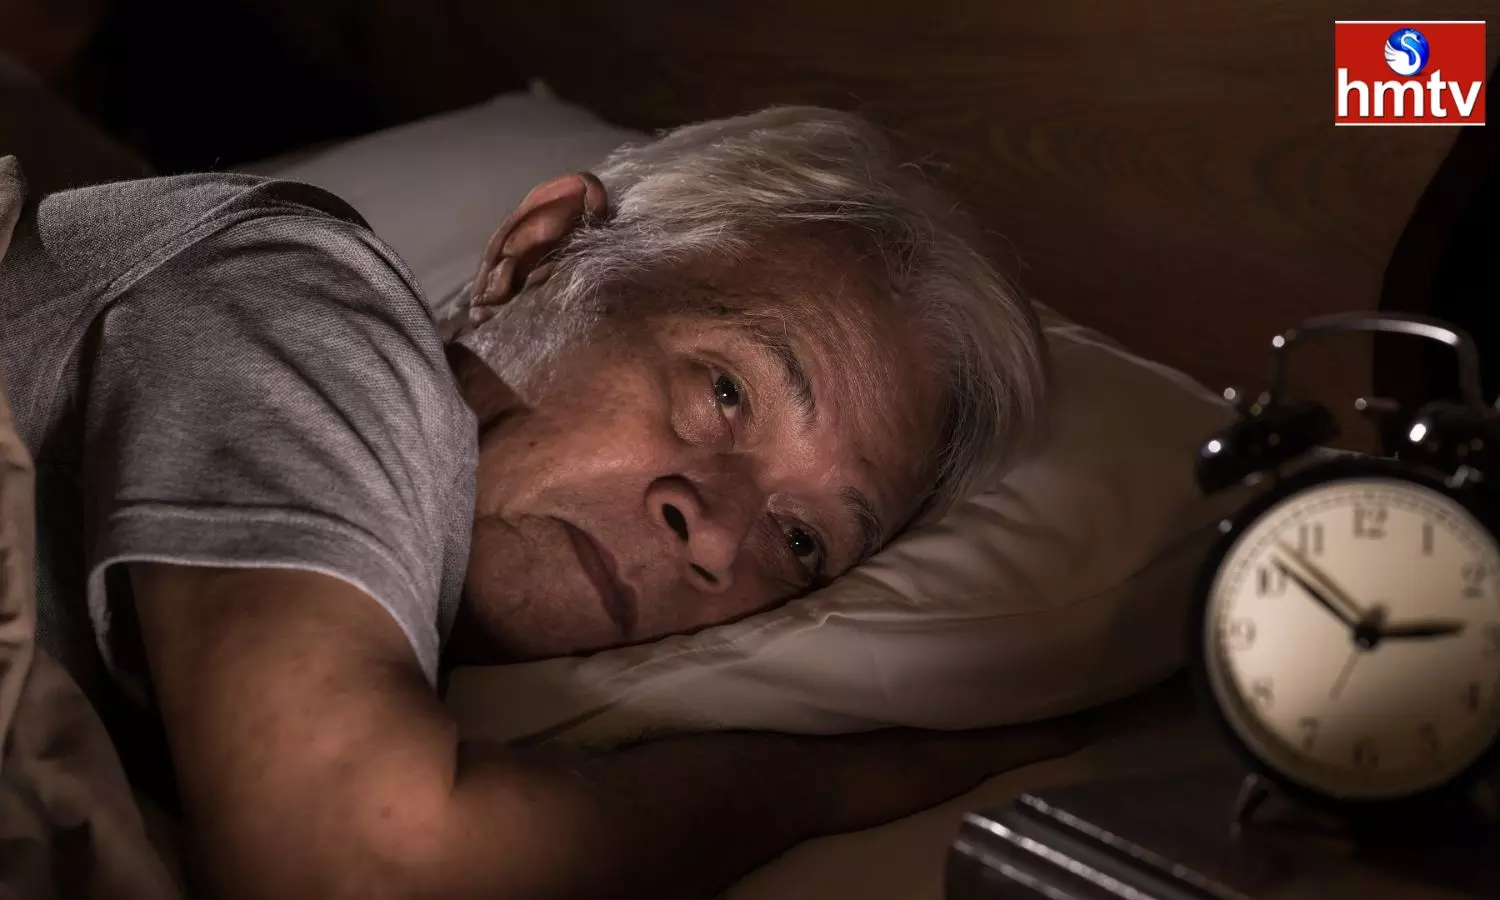 Sleep Disorders After 40 Years If These Habits Are Not Changed Problems Will Arise